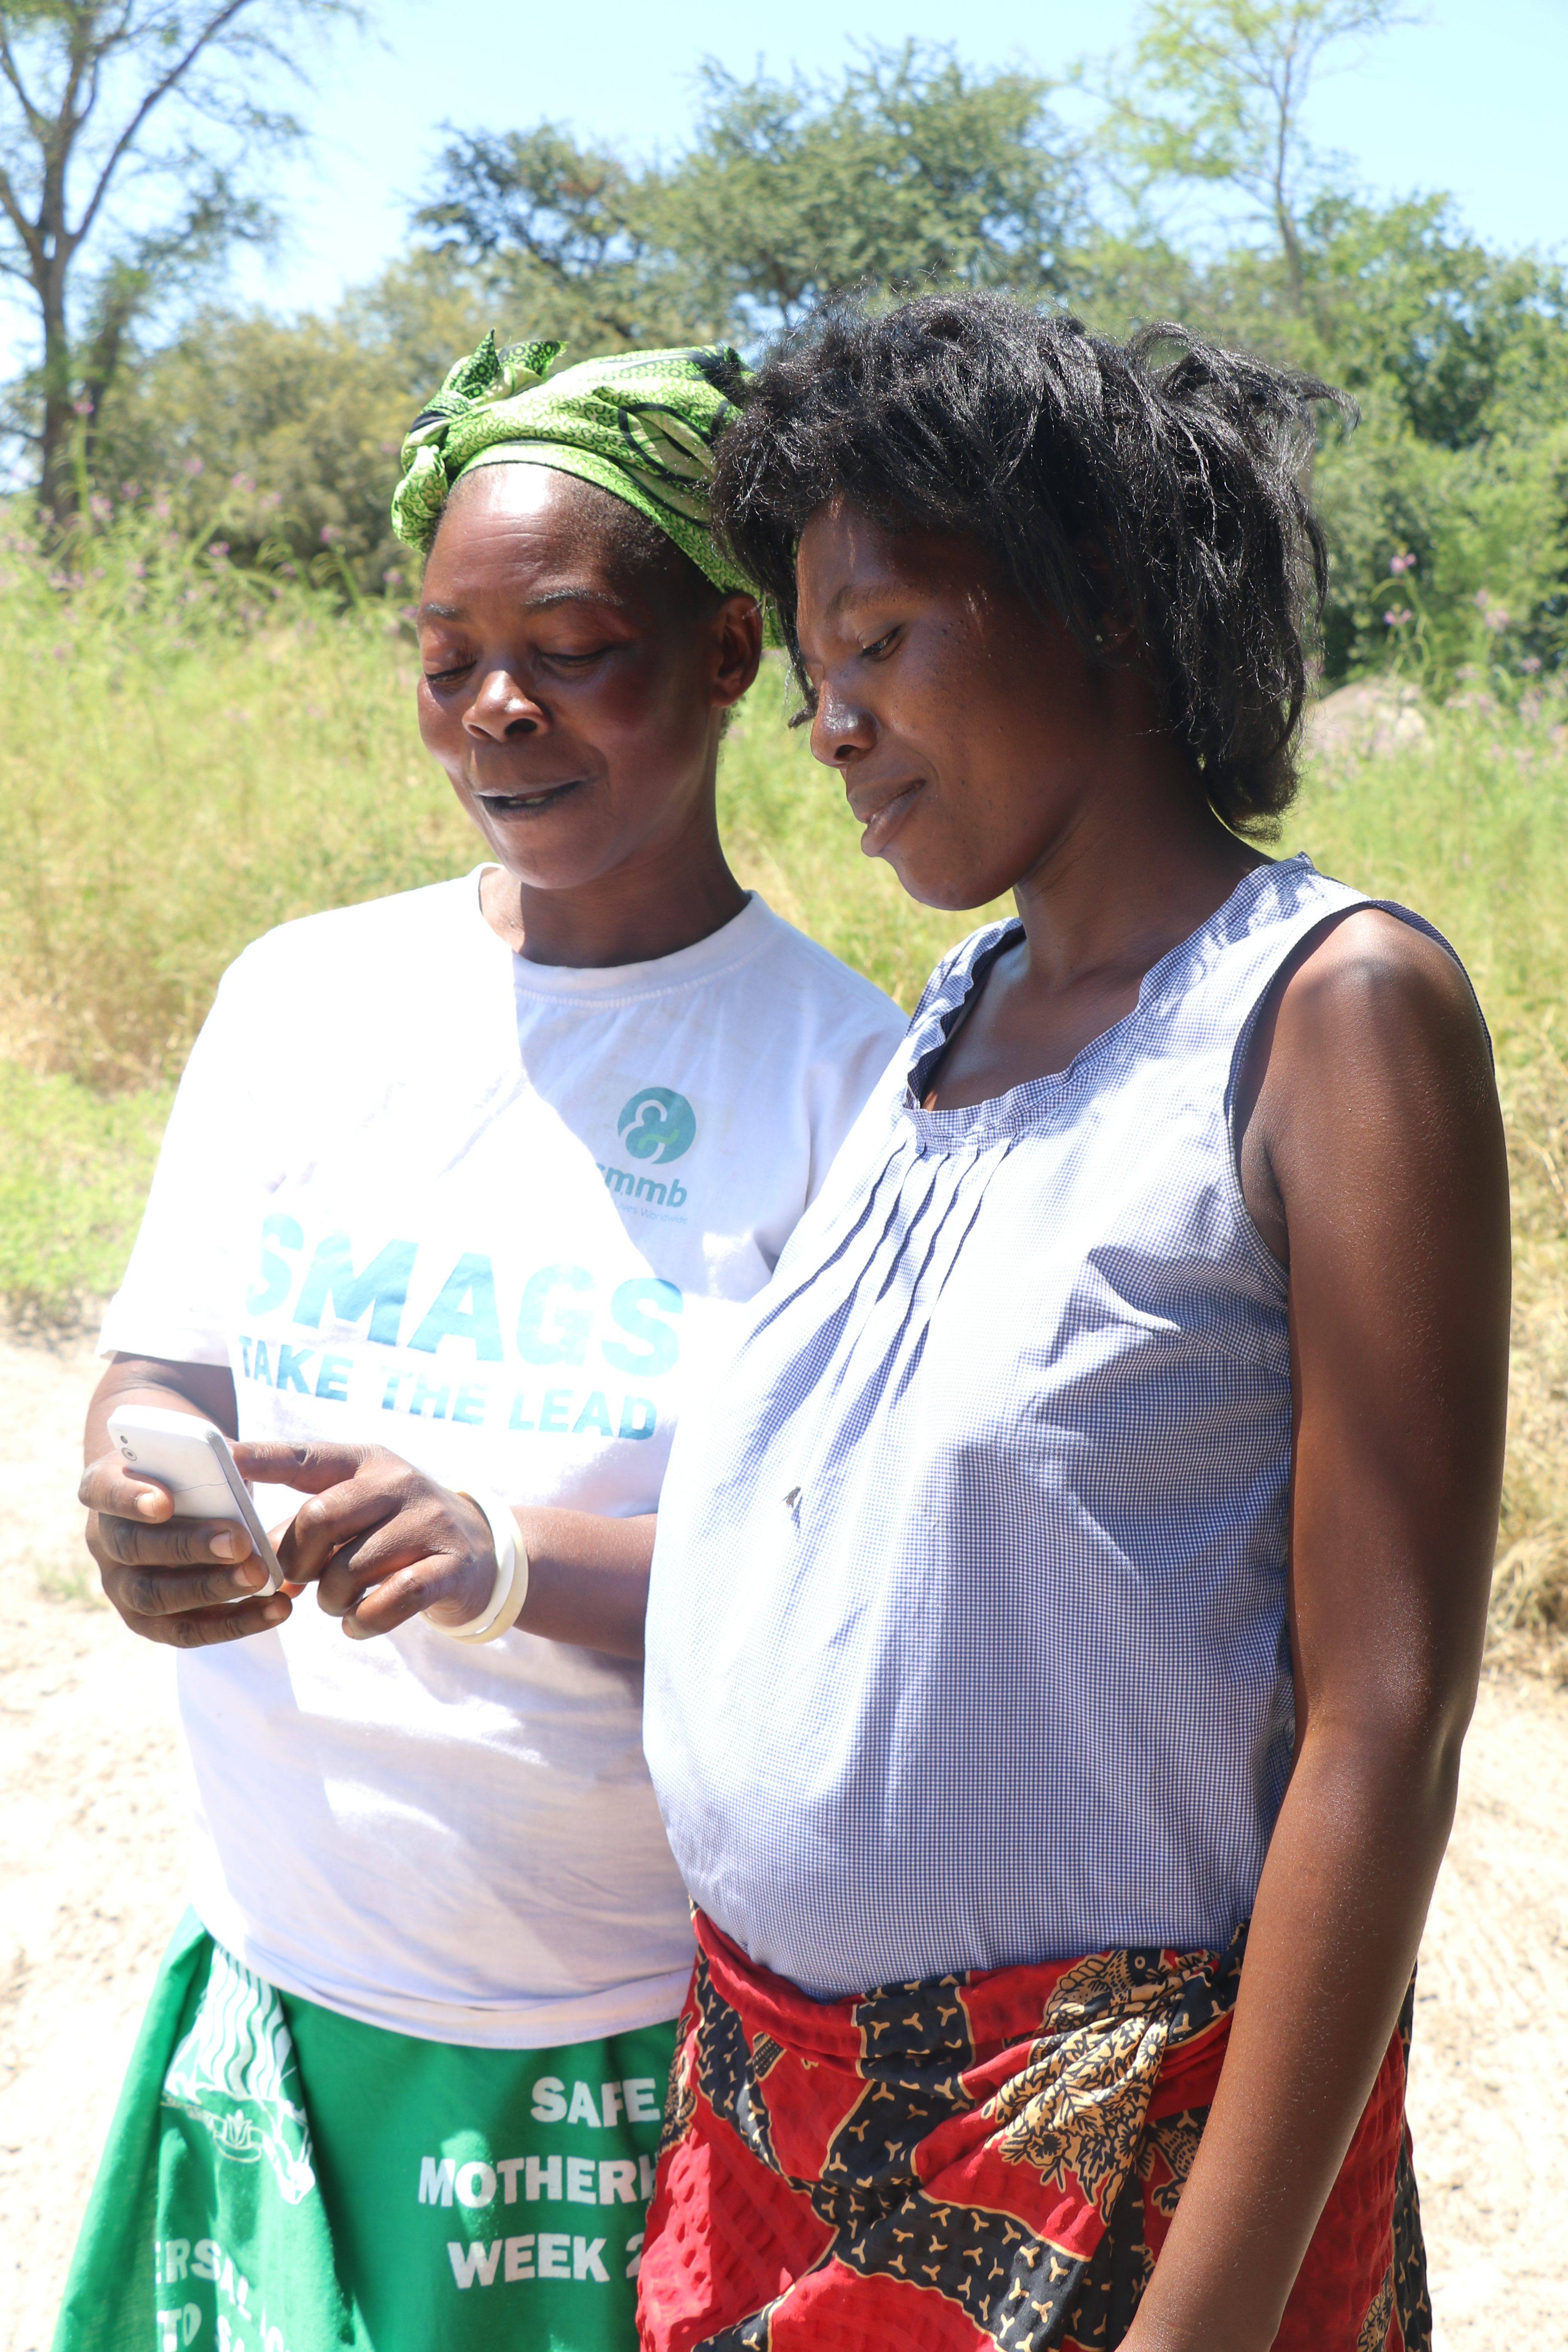 "Most women don't remember the details about their pregnancy, like due dates or antenatal visits. The technology provides on-the-spot information that helps ensure a healthy pregnancy." - Lumba, Safe Motherhood Action Group member 